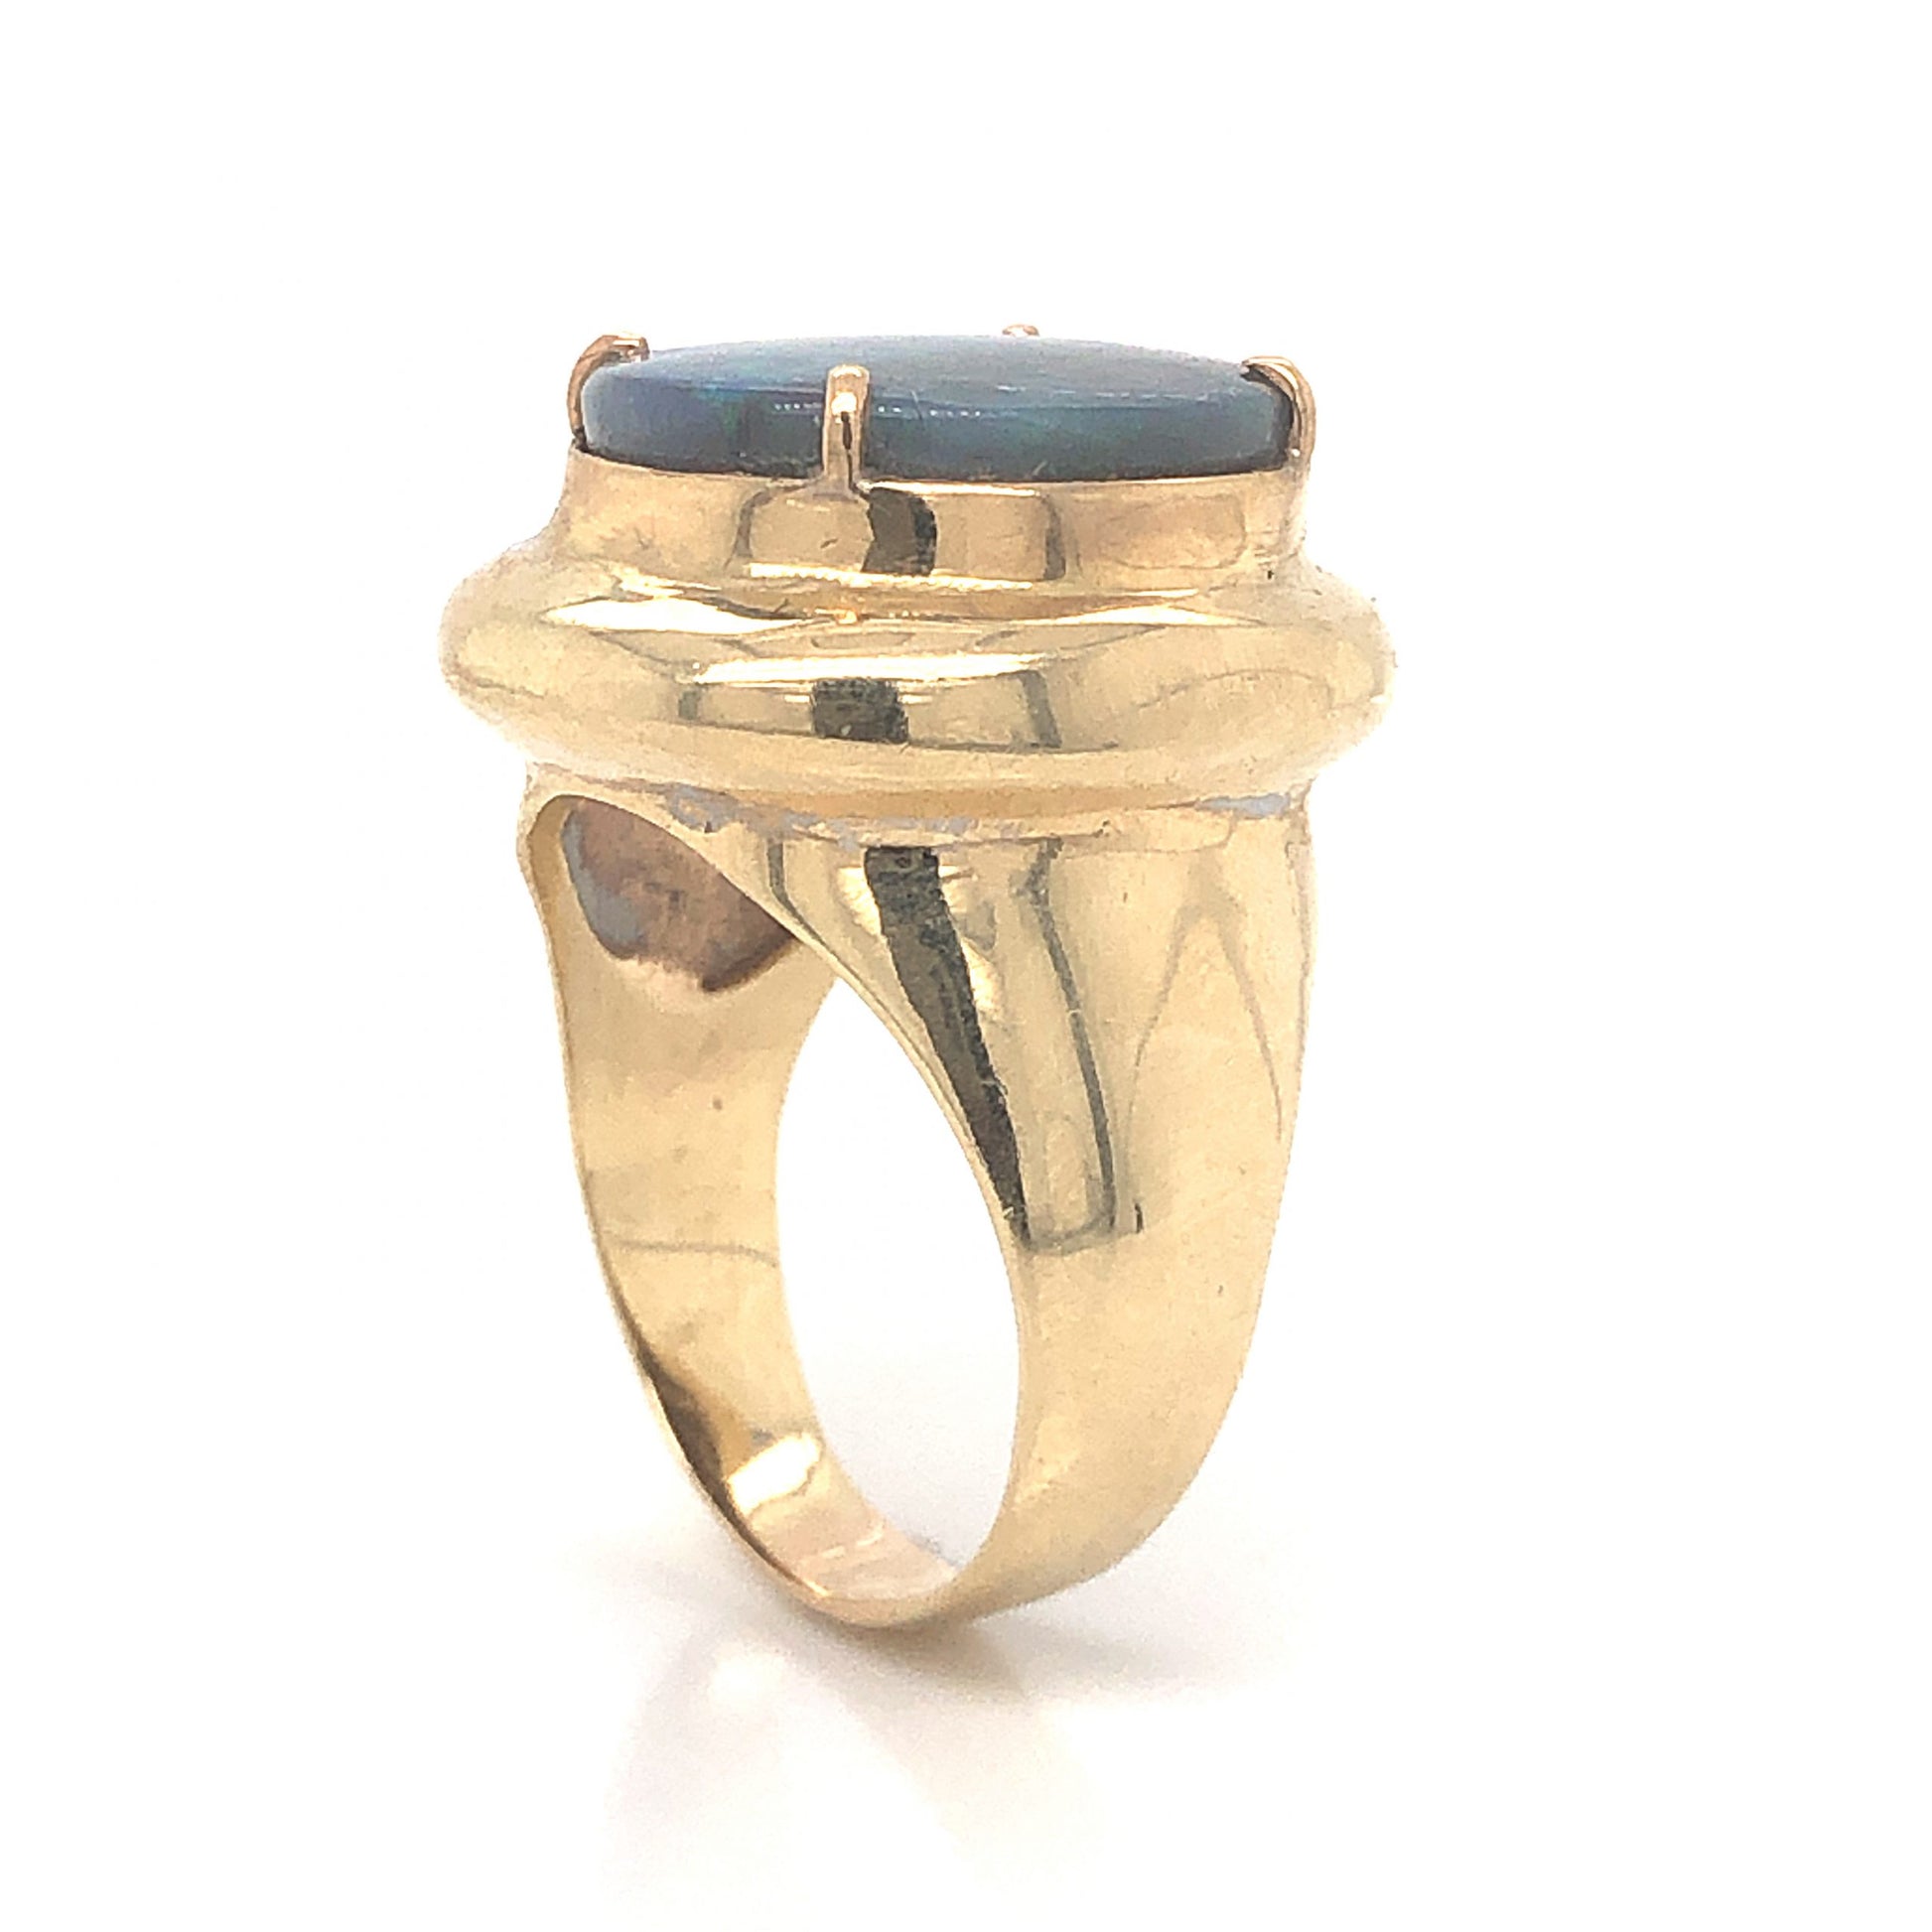 Mid-Century Opal Tablet Cocktail Ring in 14k Yellow GoldComposition: 14 Karat Yellow GoldRing Size: 10Total Gram Weight: 14.2 gInscription: 14k 